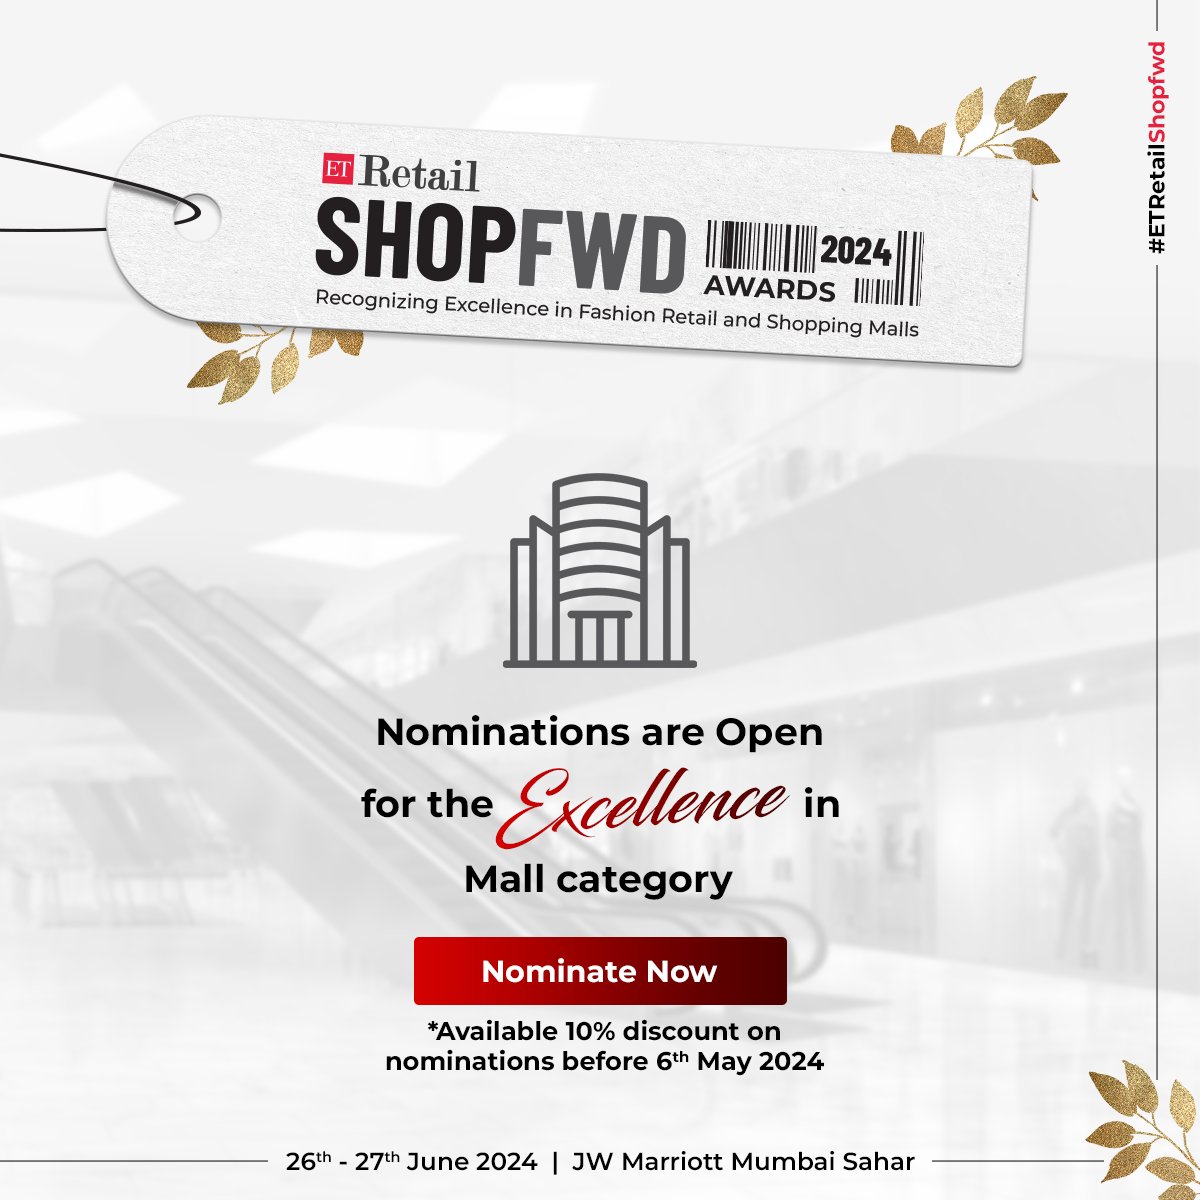 Nominations are now OPEN for the coveted Excellence in Mall category at the ET Retail Shopfwd Awards 2024. 🛍️✨ Early birds catch a 10% discount until May 6th. 🐦💸 Nominate your mall today. Nominate Here- bit.ly/3w99l1M #ETRetail #ETRetailShopFwd #ShopfwdAwards